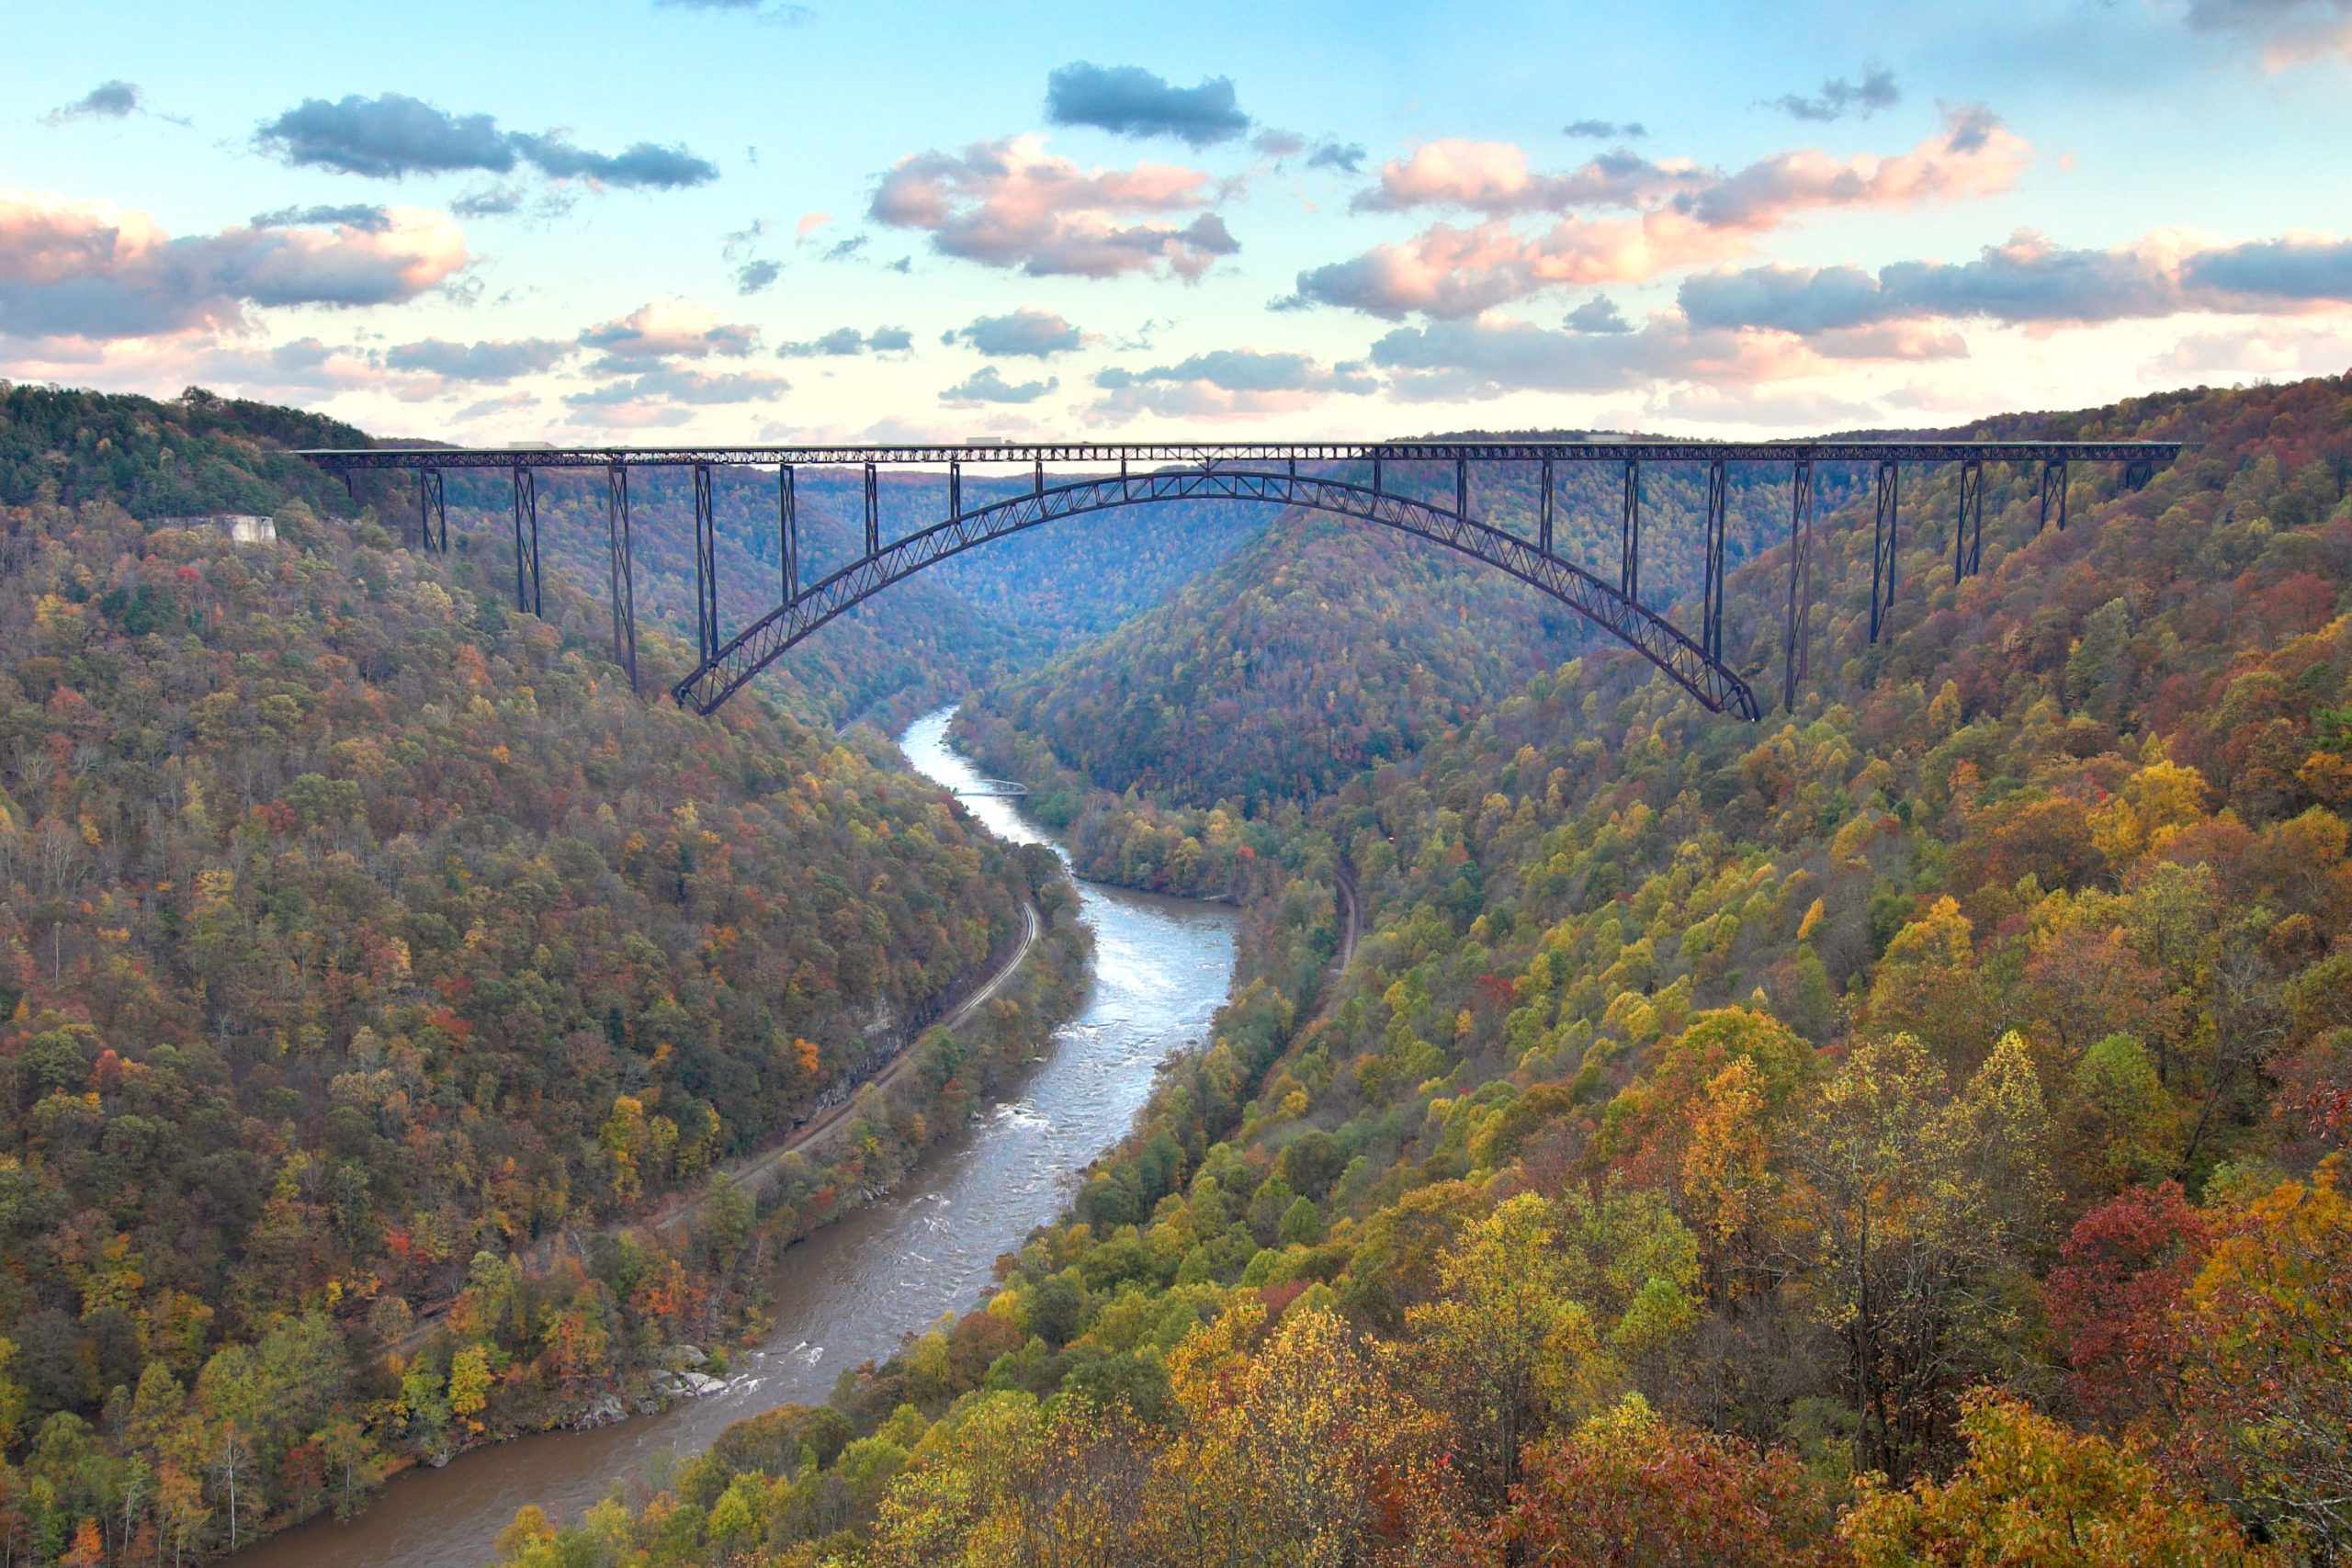 Announcing the 63rd National Park — New River Gorge